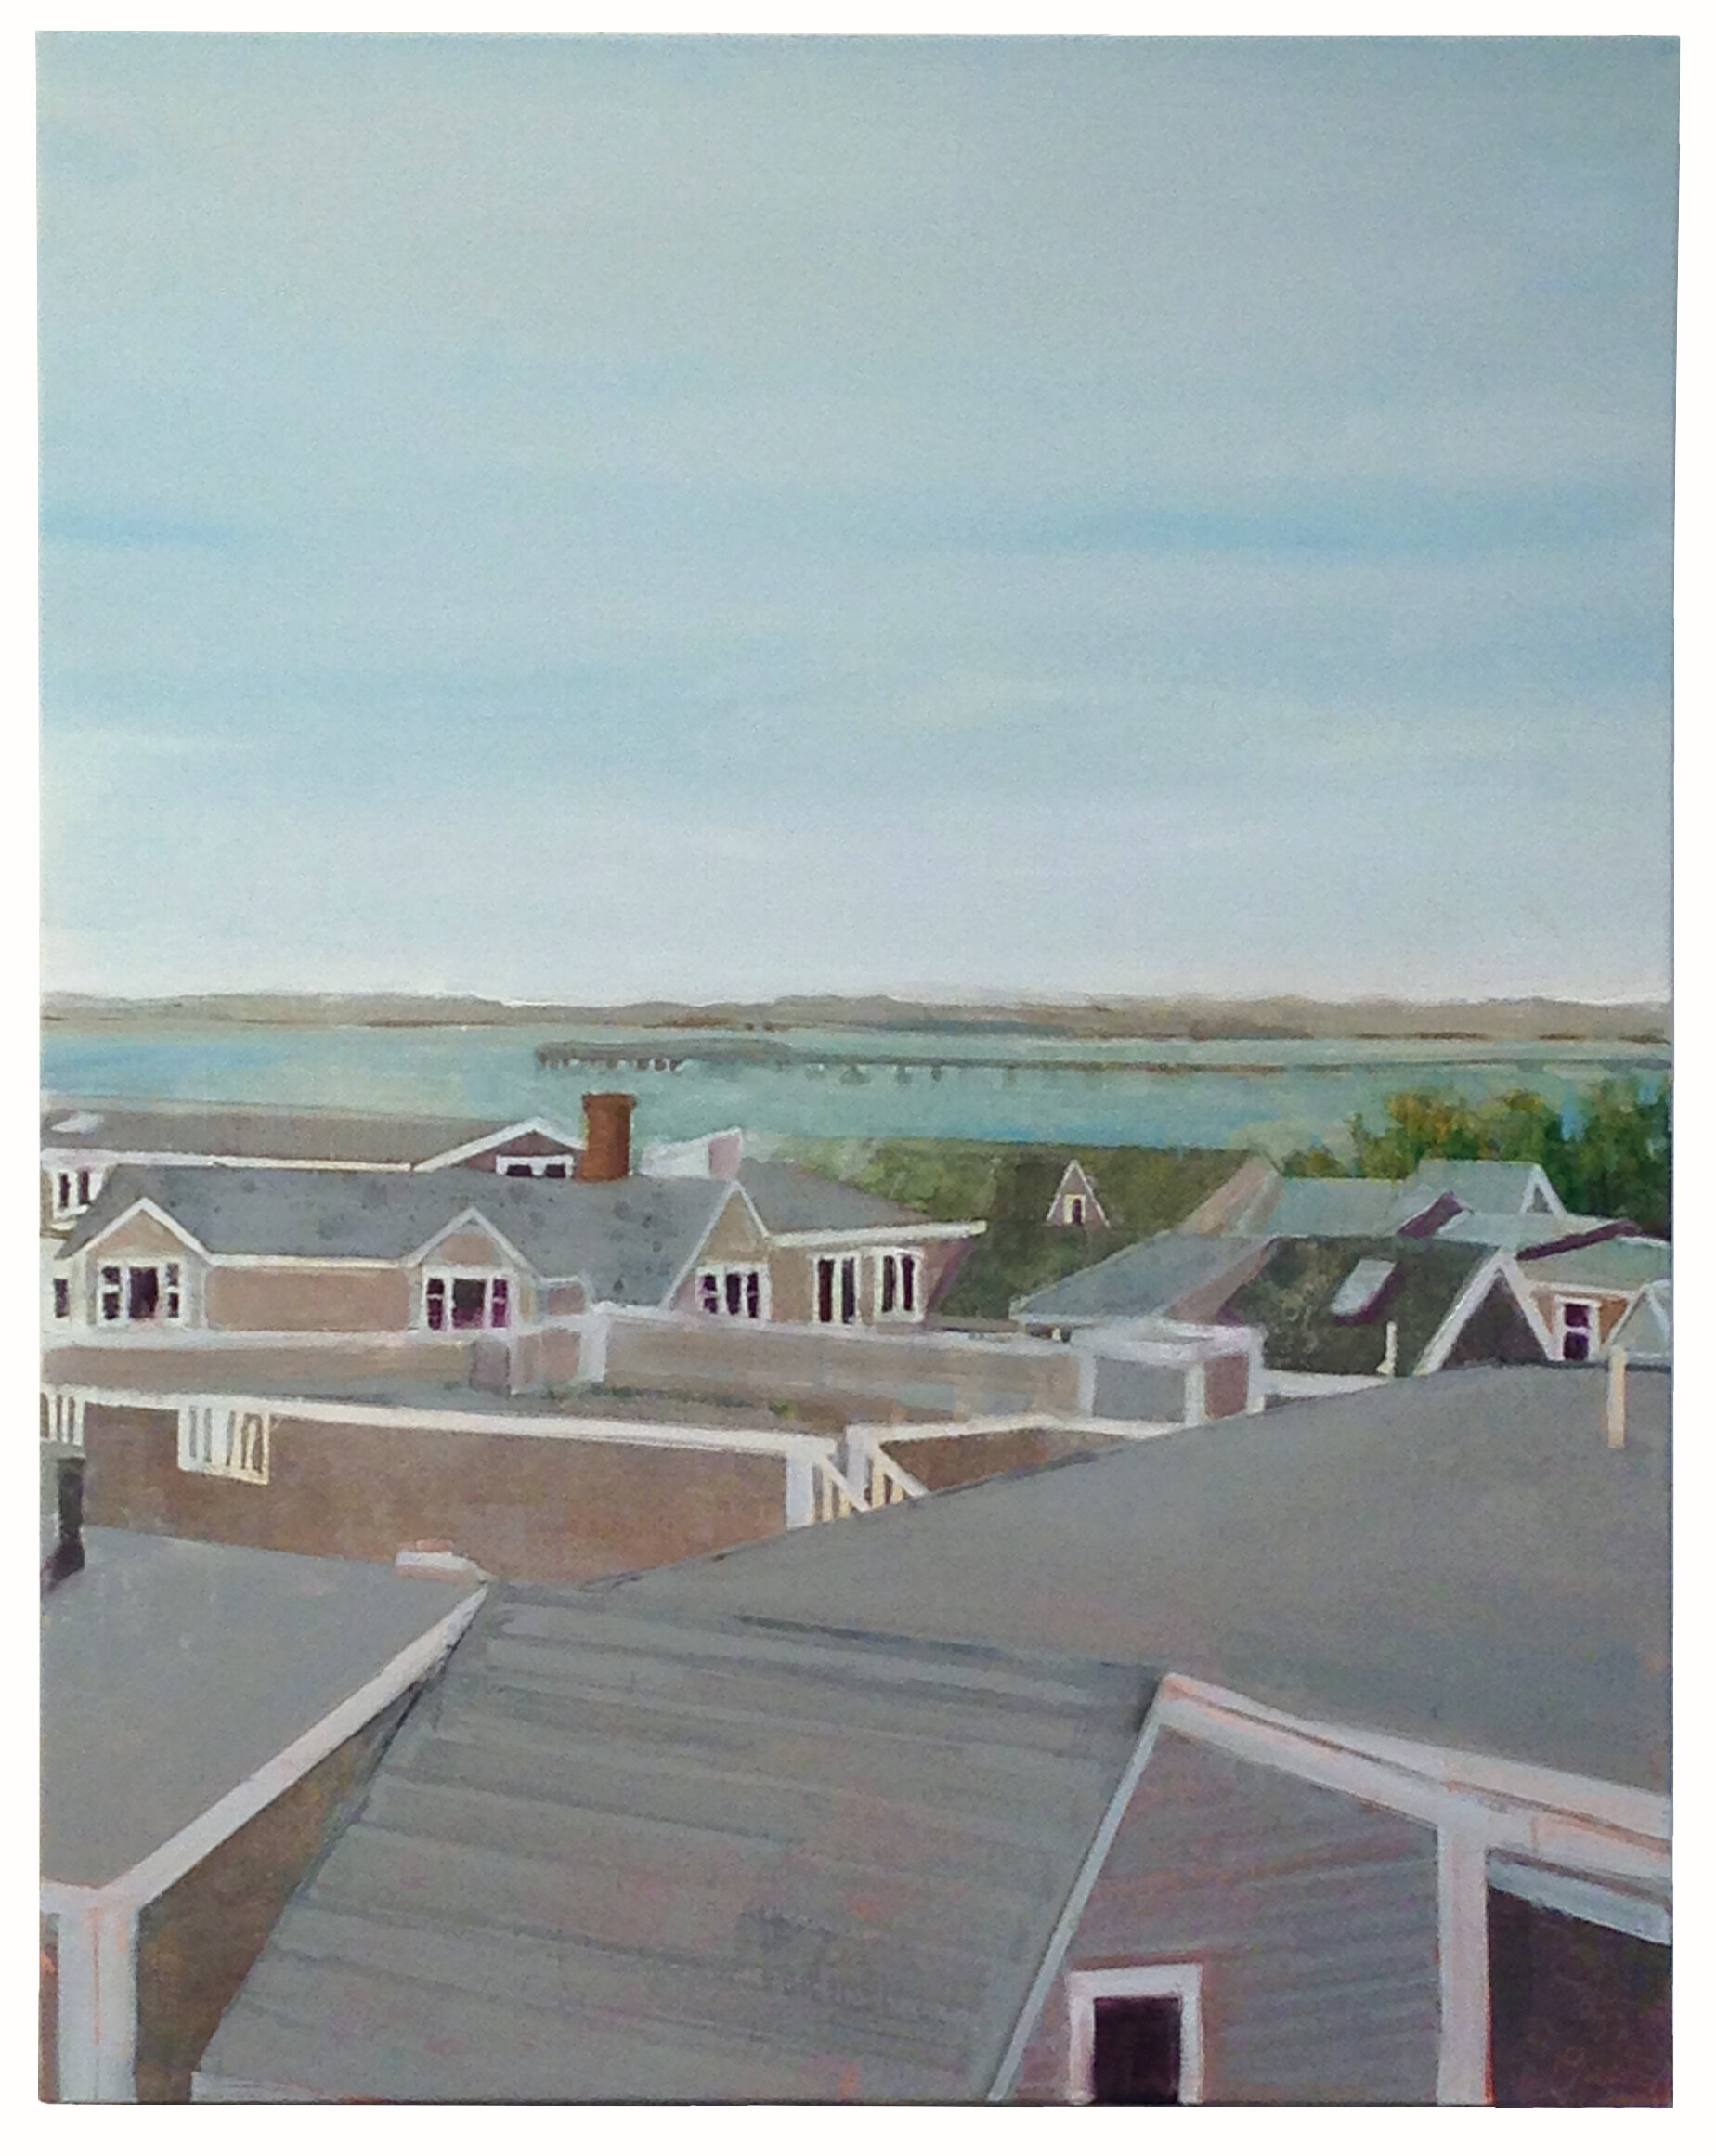    West End Roofs 24 x 19 inches Oil on linen 2017 